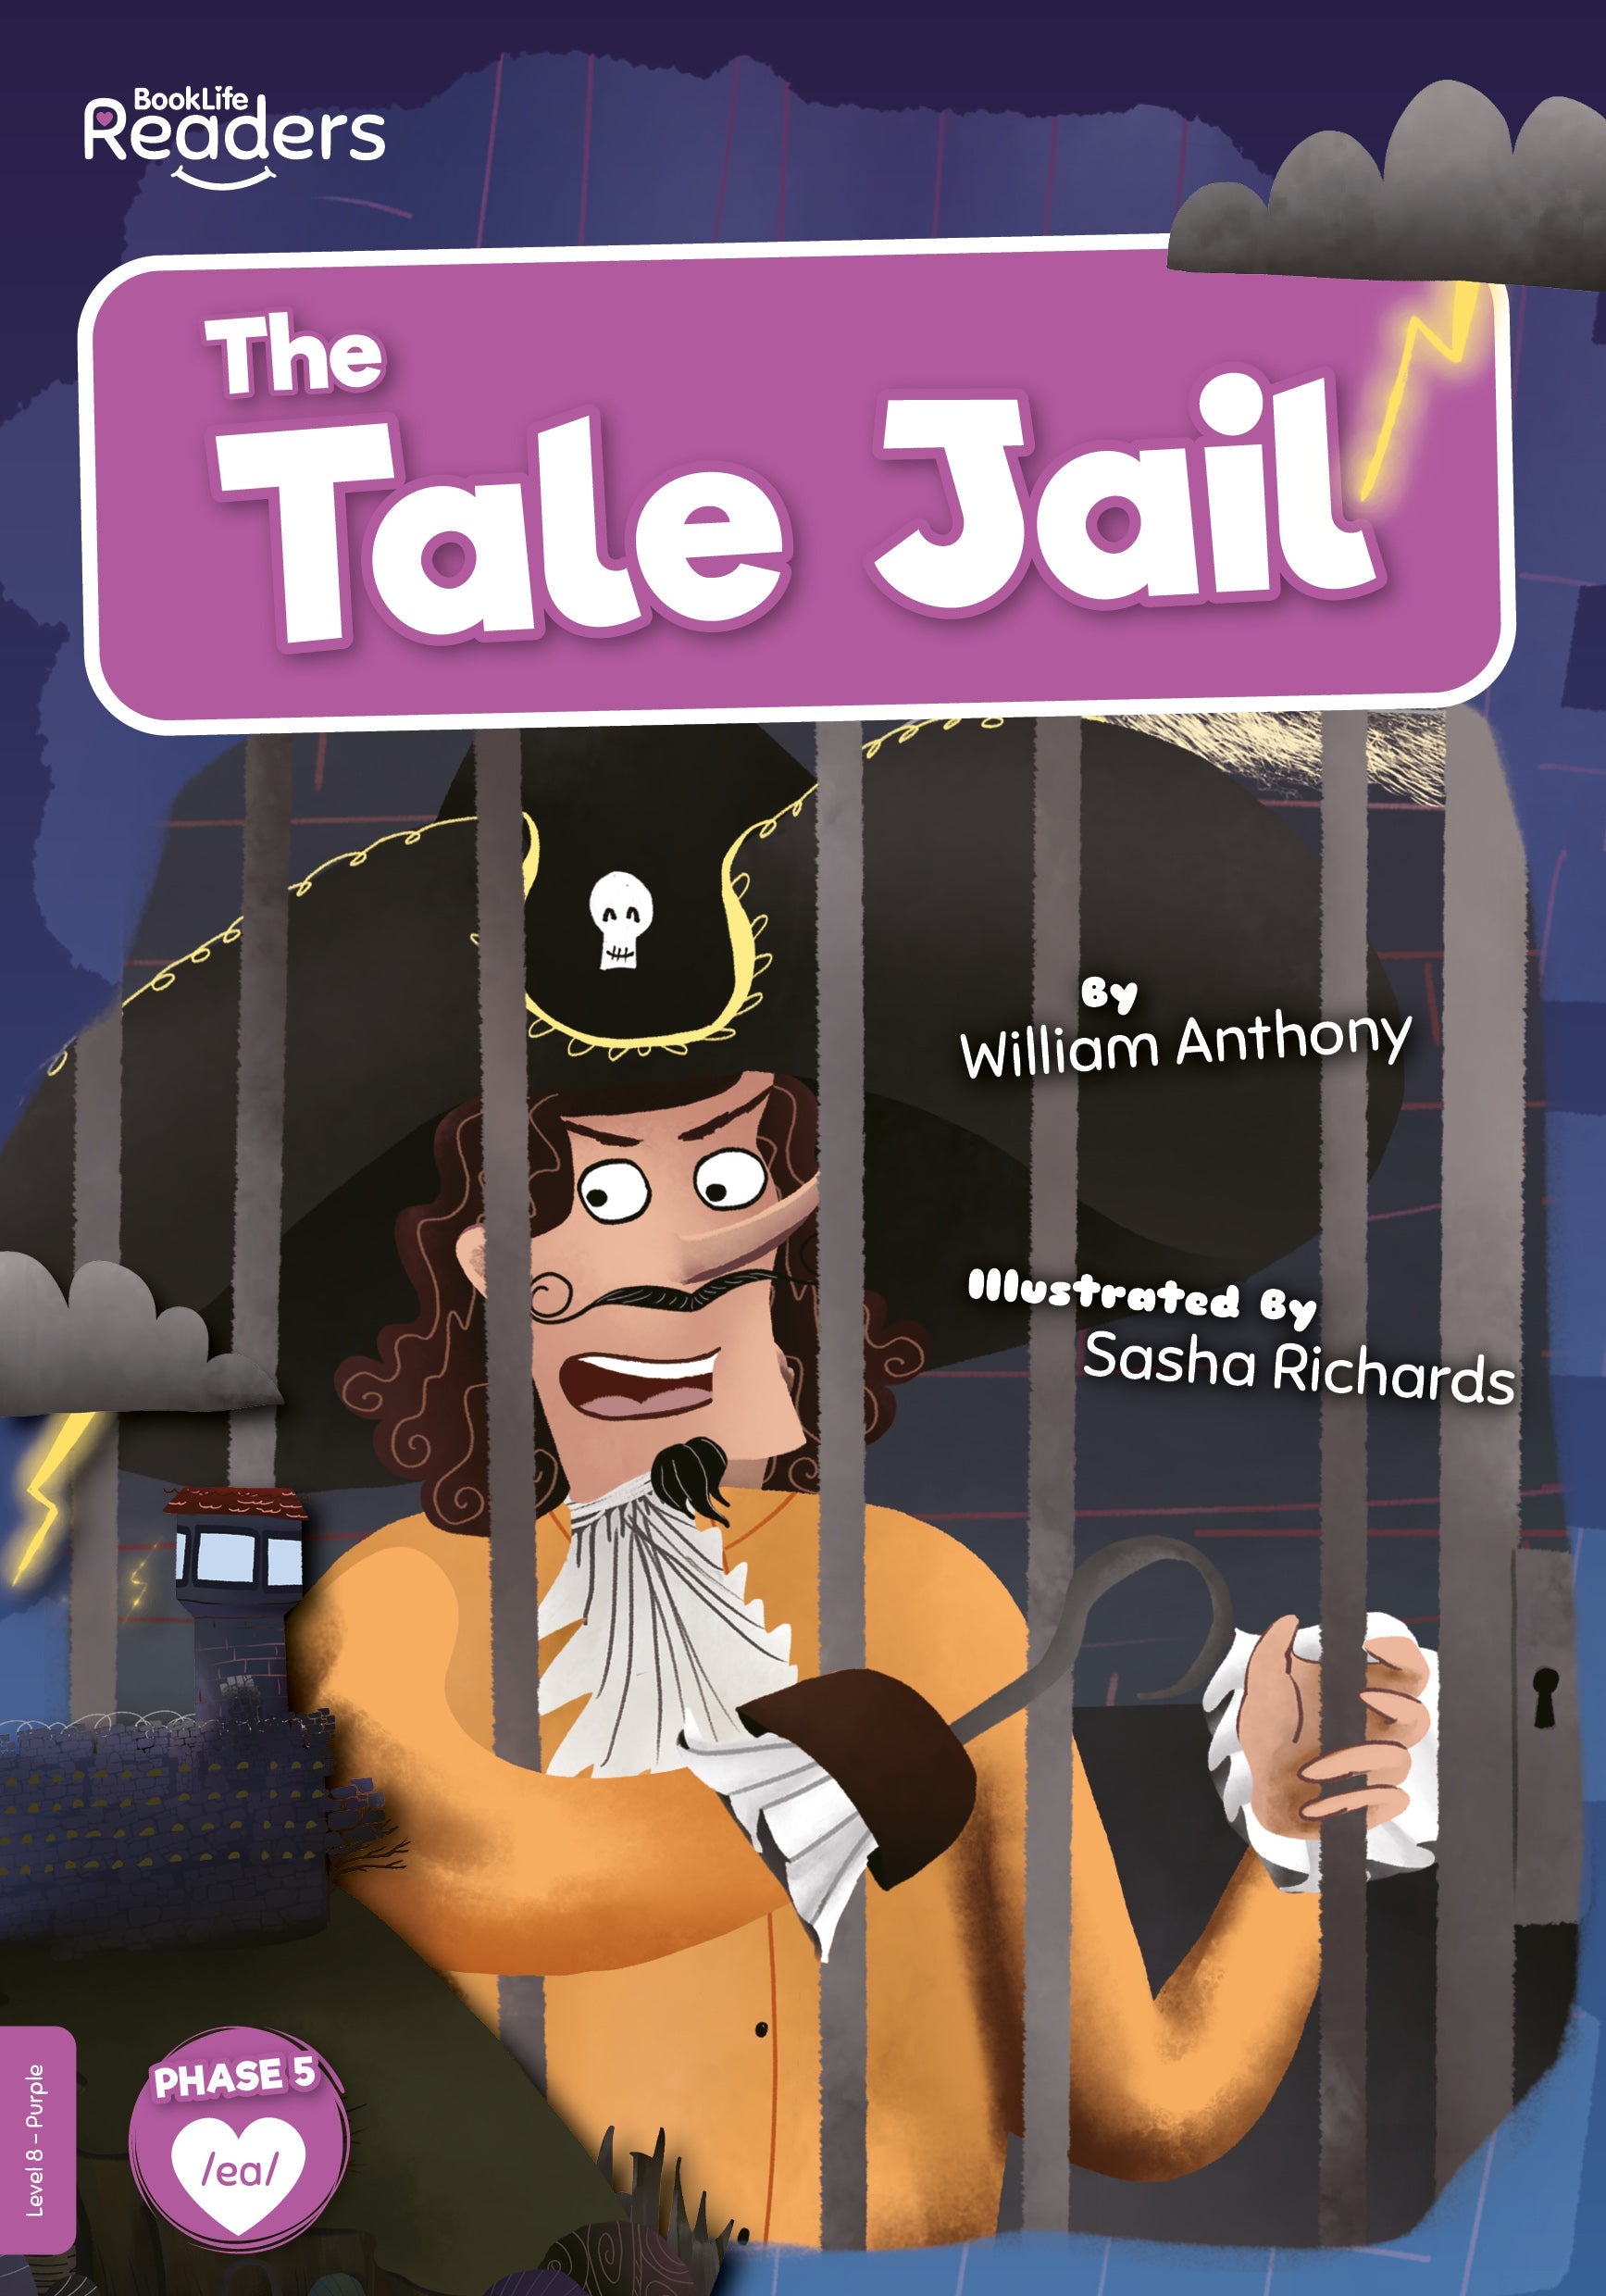 The Tale Jail